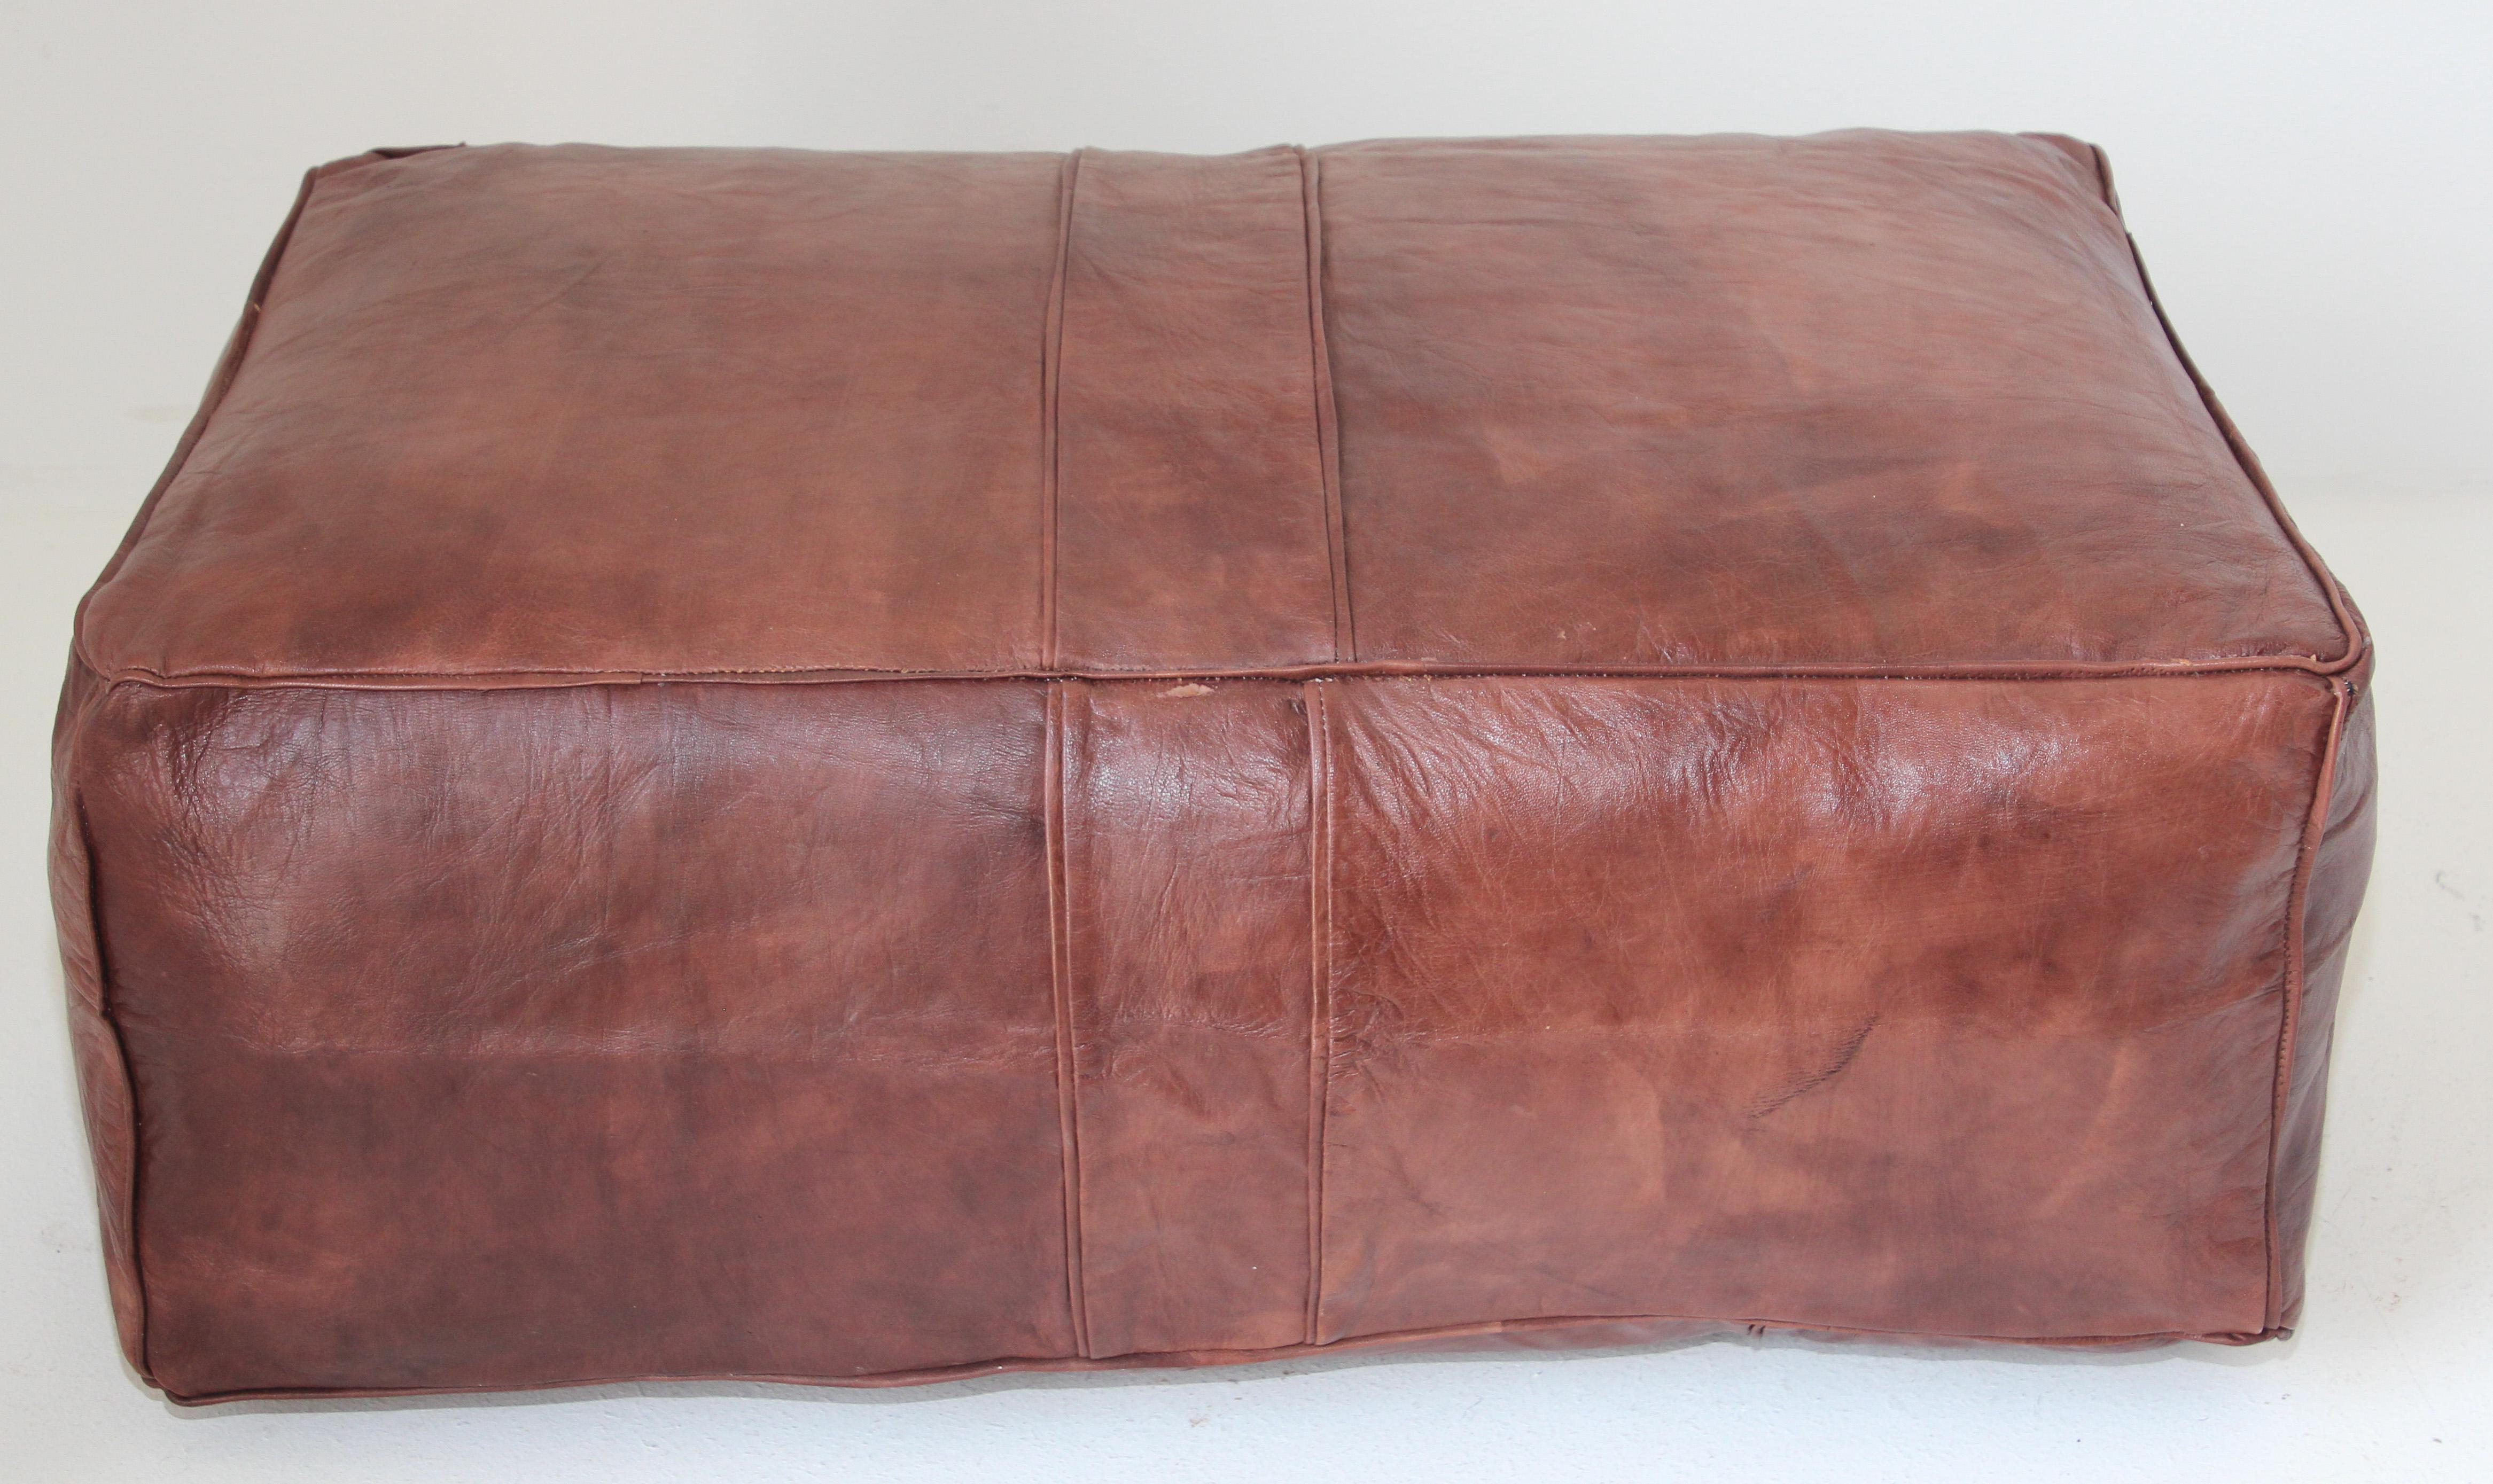 Large vintage brown hand tooled leather Moroccan ottoman.
Rectangular shape pouf in brown leather.
Handcrafted by skilled artisans in Marrakech, Morocco, 
circa 1970s.